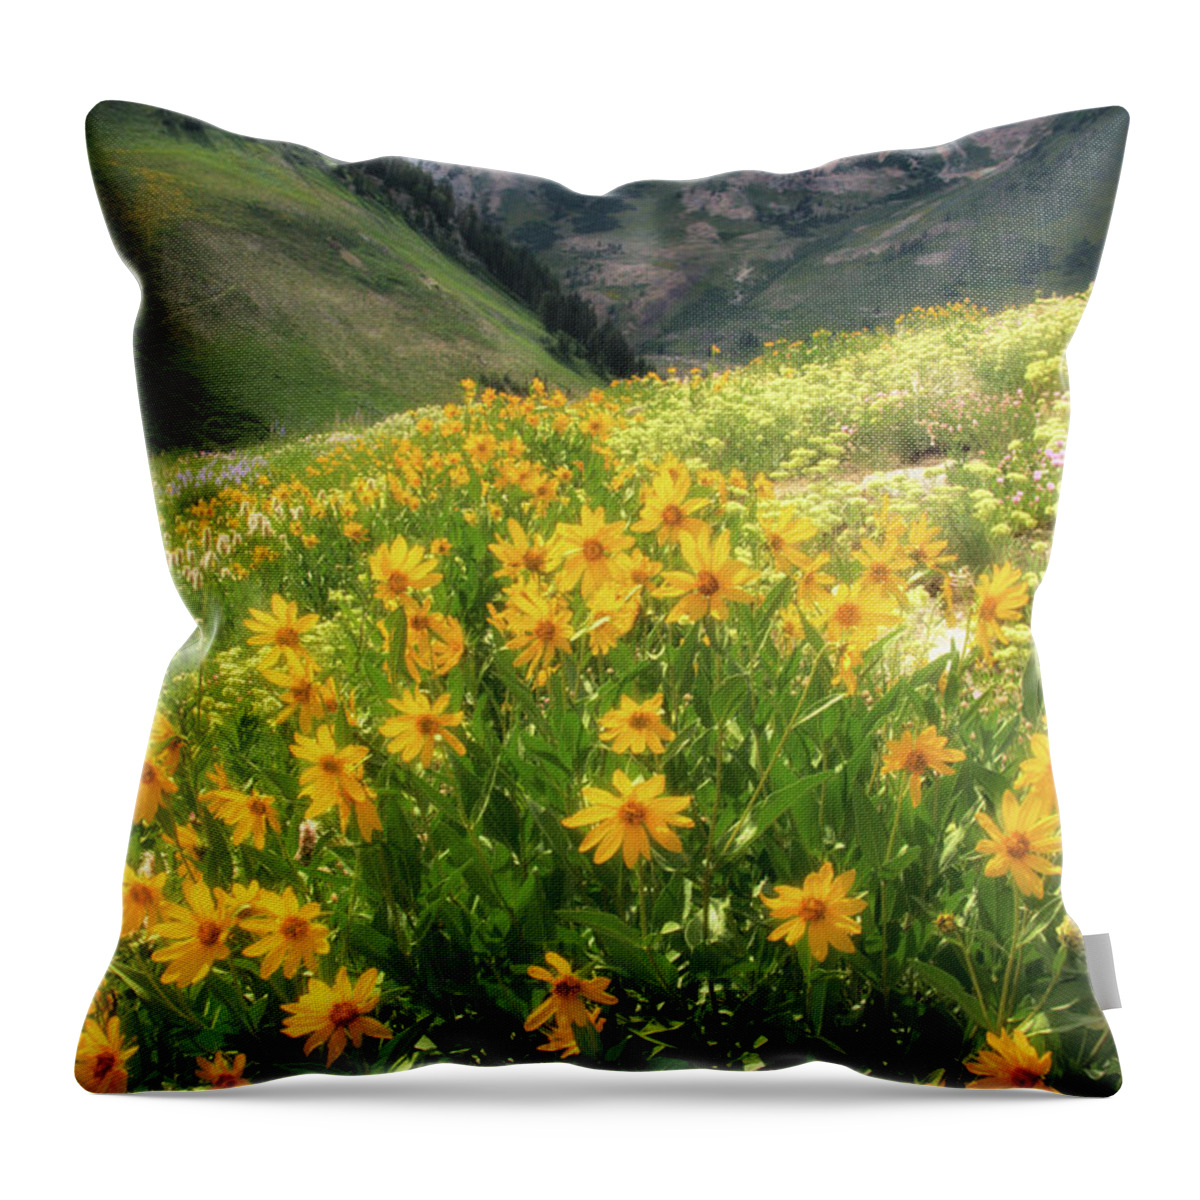  Throw Pillow featuring the photograph Albion Basin Wildflowers #5 by Douglas Pulsipher